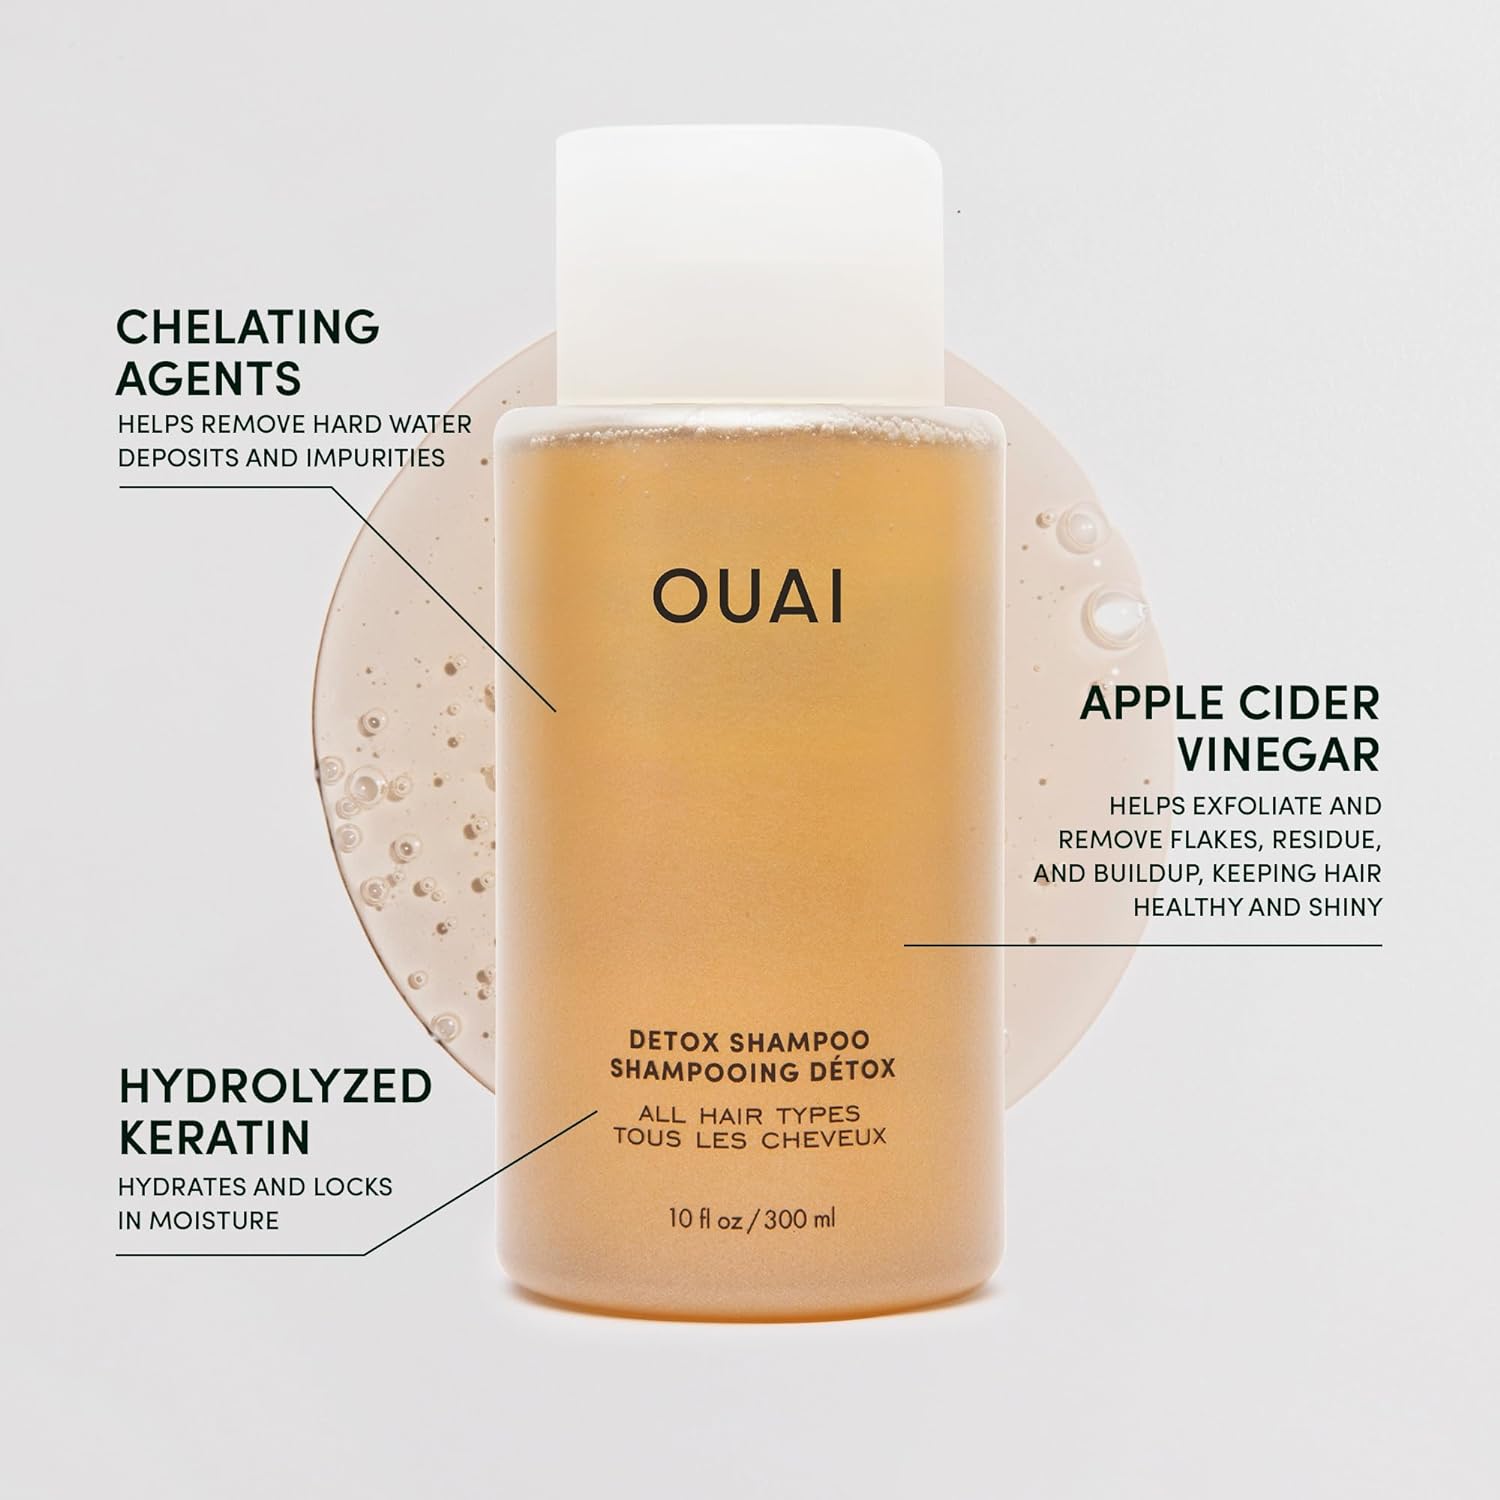 OUAI Detox Shampoo Bundle - Clarifying Shampoo for Build Up, Dirt, Oil, Product & Hard Water - With Apple Cider Vinegar & Keratin - Sulfate-Free Hair Care (3 Count, 3oz/10oz/16oz) : Beauty & Personal Care